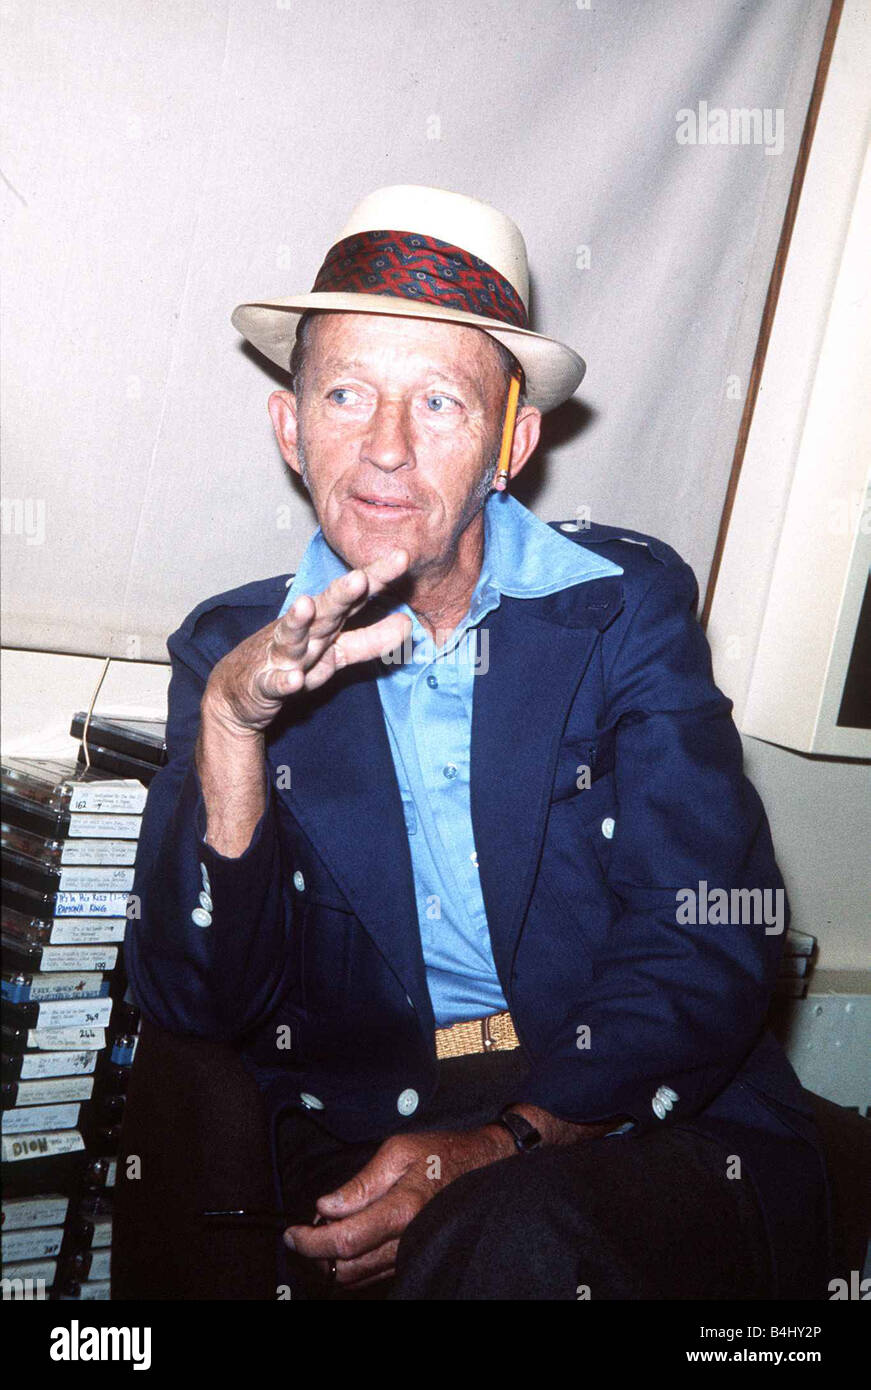 Bing Crosby Singer and Actor dbase msi Stock Photo